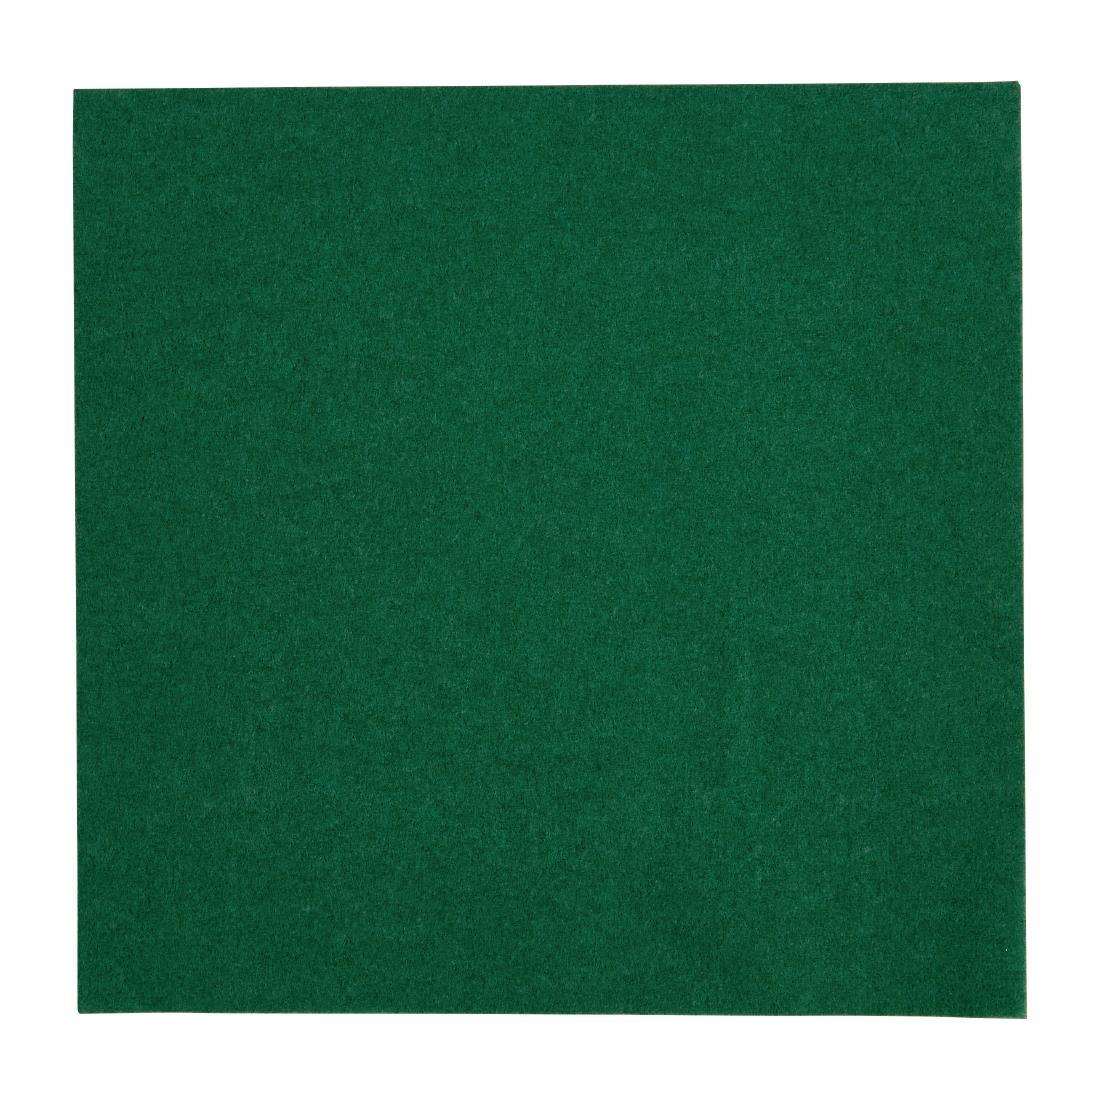 Fiesta Recyclable Lunch Napkin Green 33x33cm 2ply 1/4 Fold (Pack of 2000) - FE223  - 1